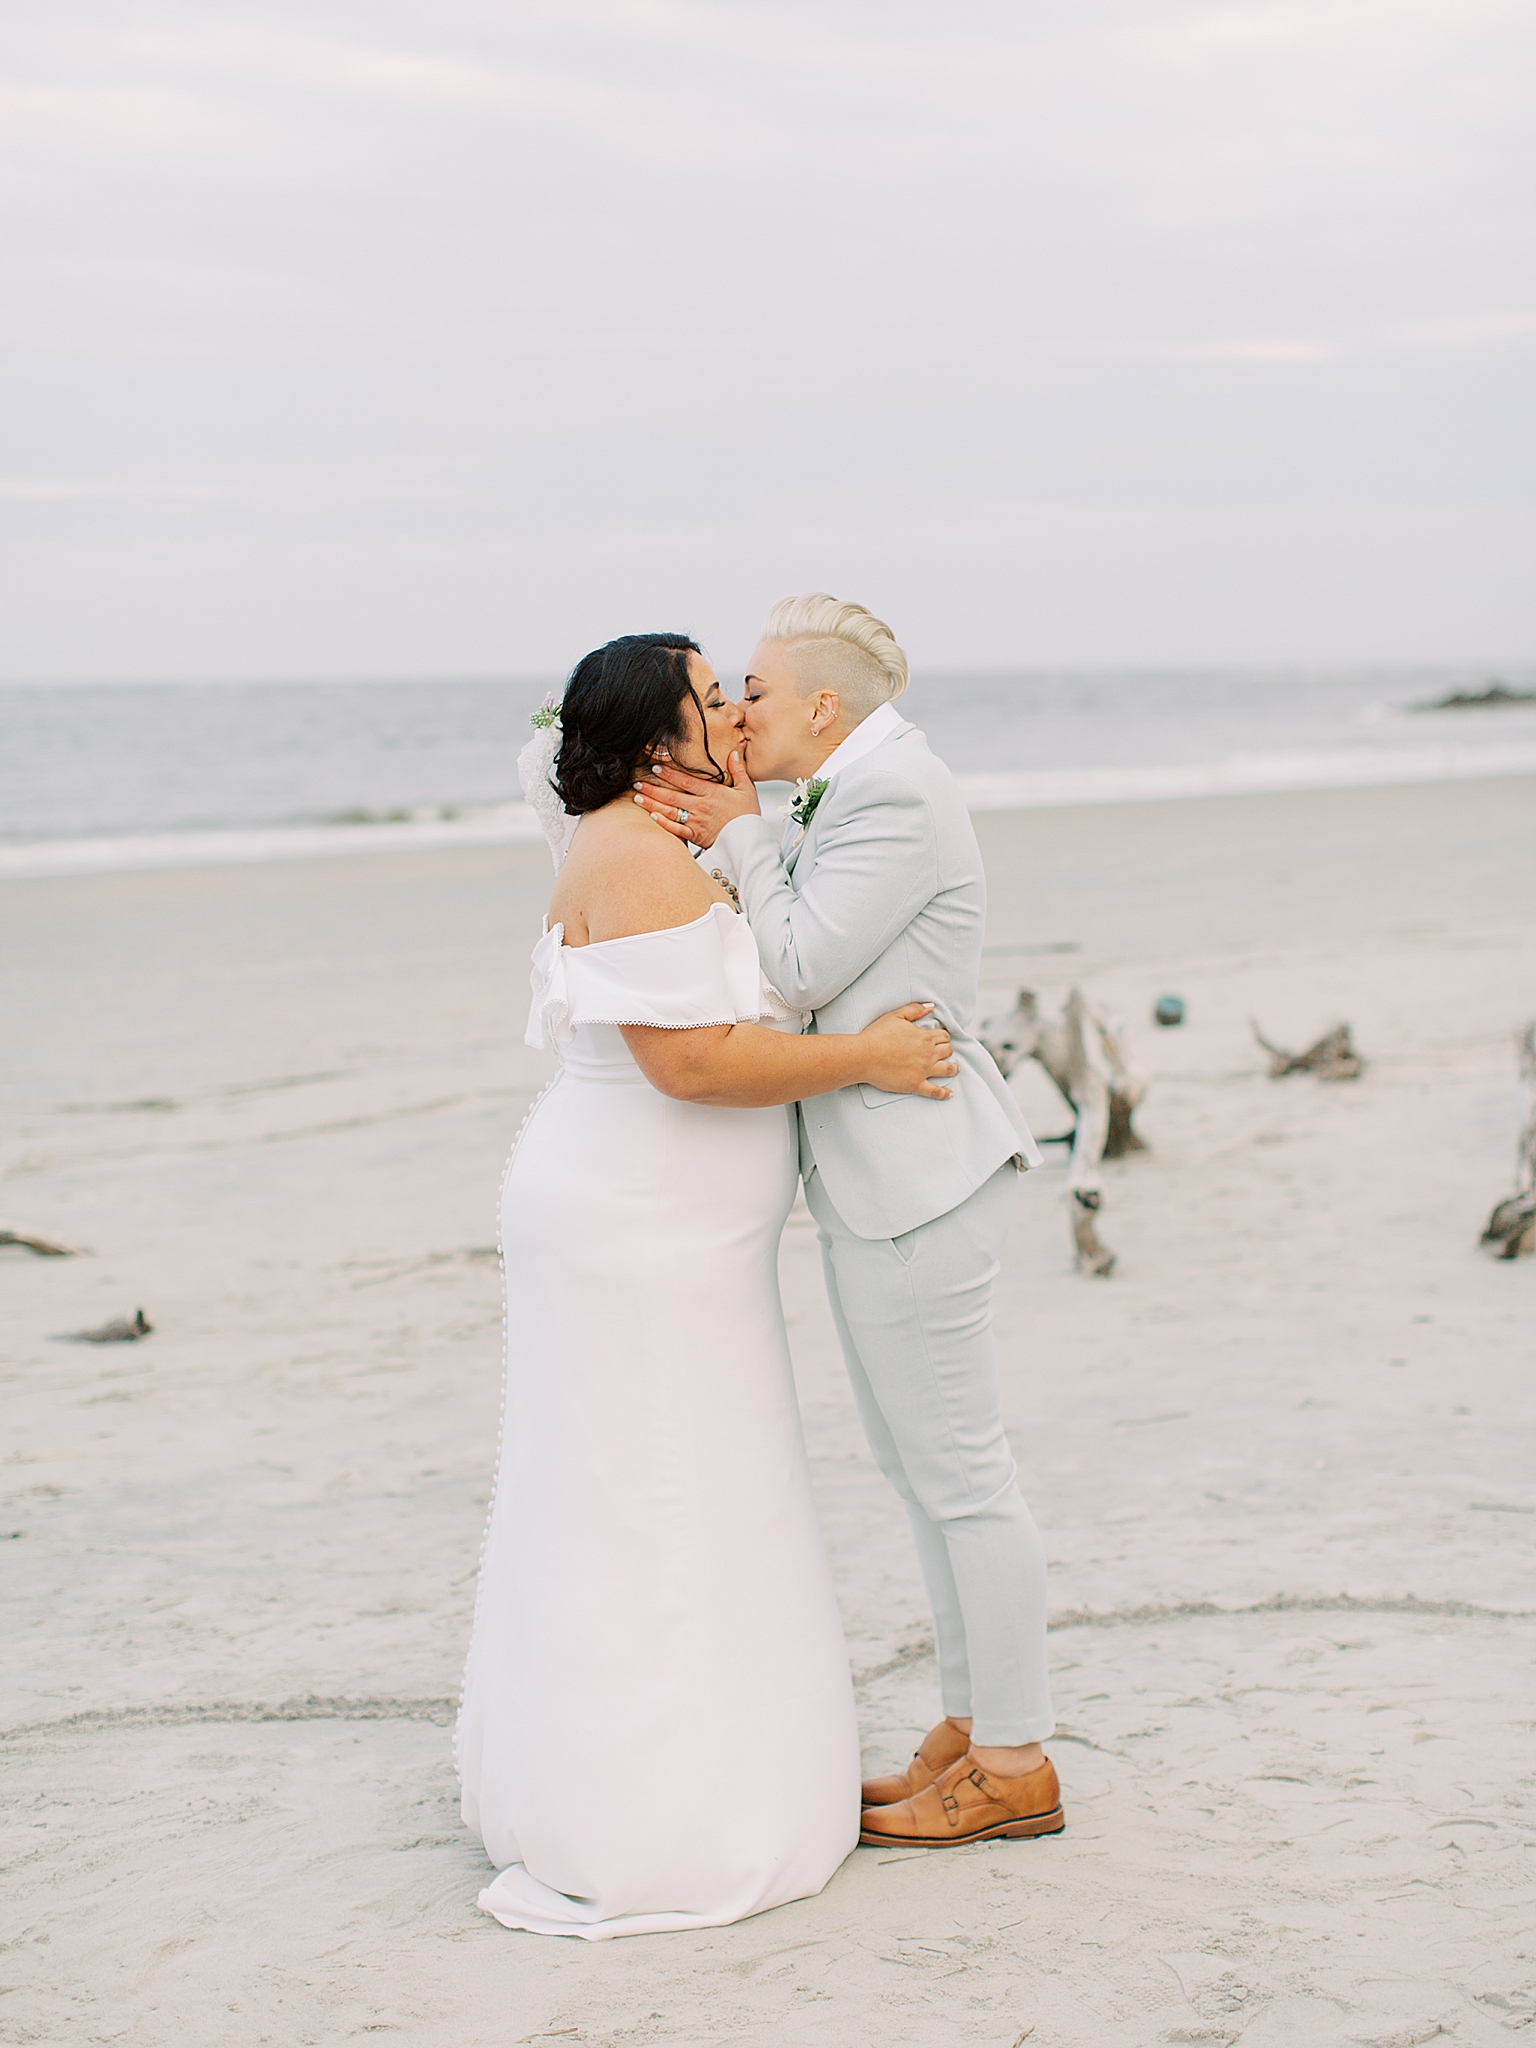 partners kiss during wedding ceremony on the beach